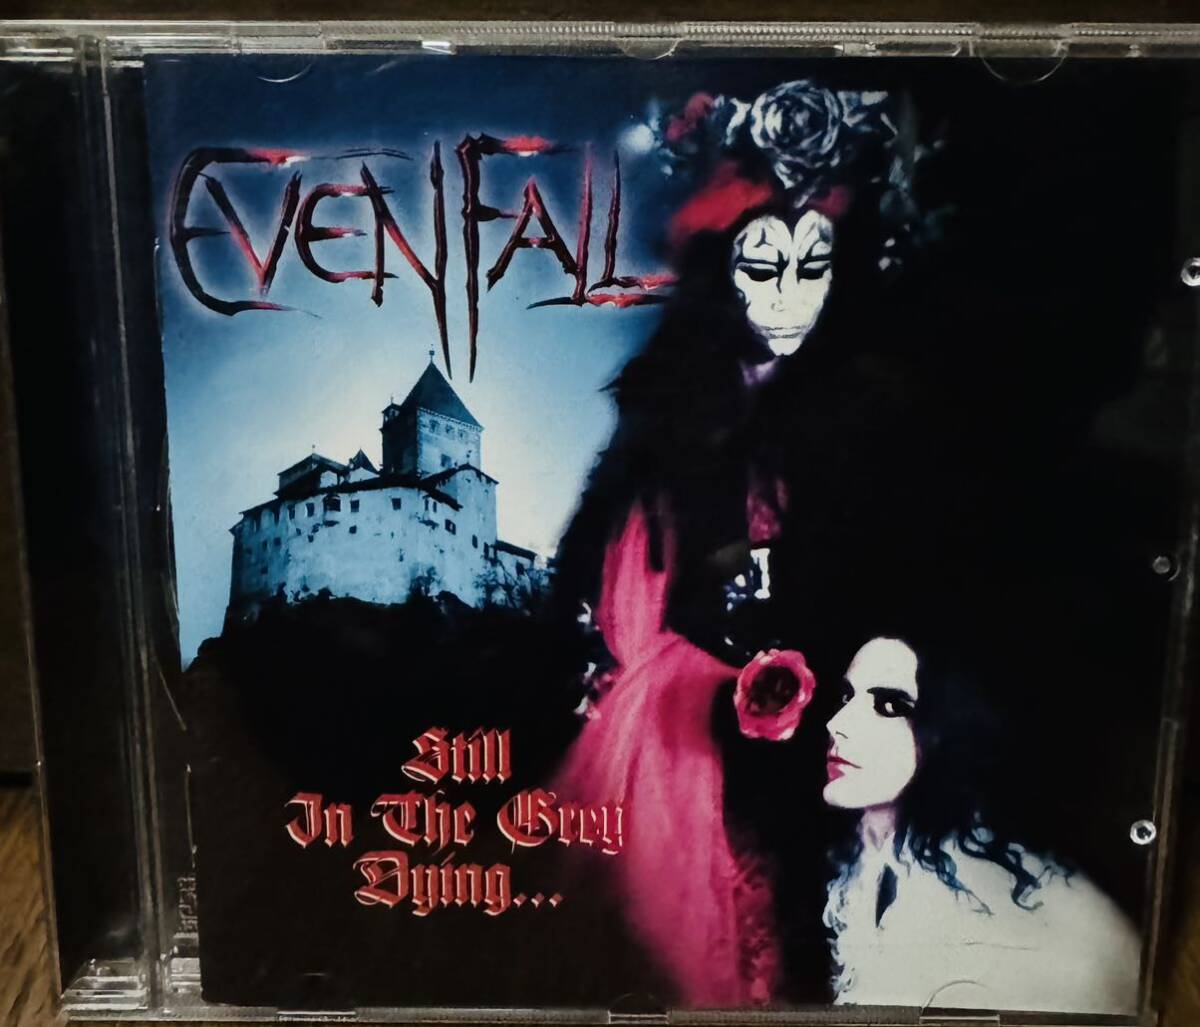 Evenfall Still In the Grey Dying 1999年ゴシックブラックメタル廃盤レア　cradle of filth dismal euphony tristania ancient ceremony_画像1